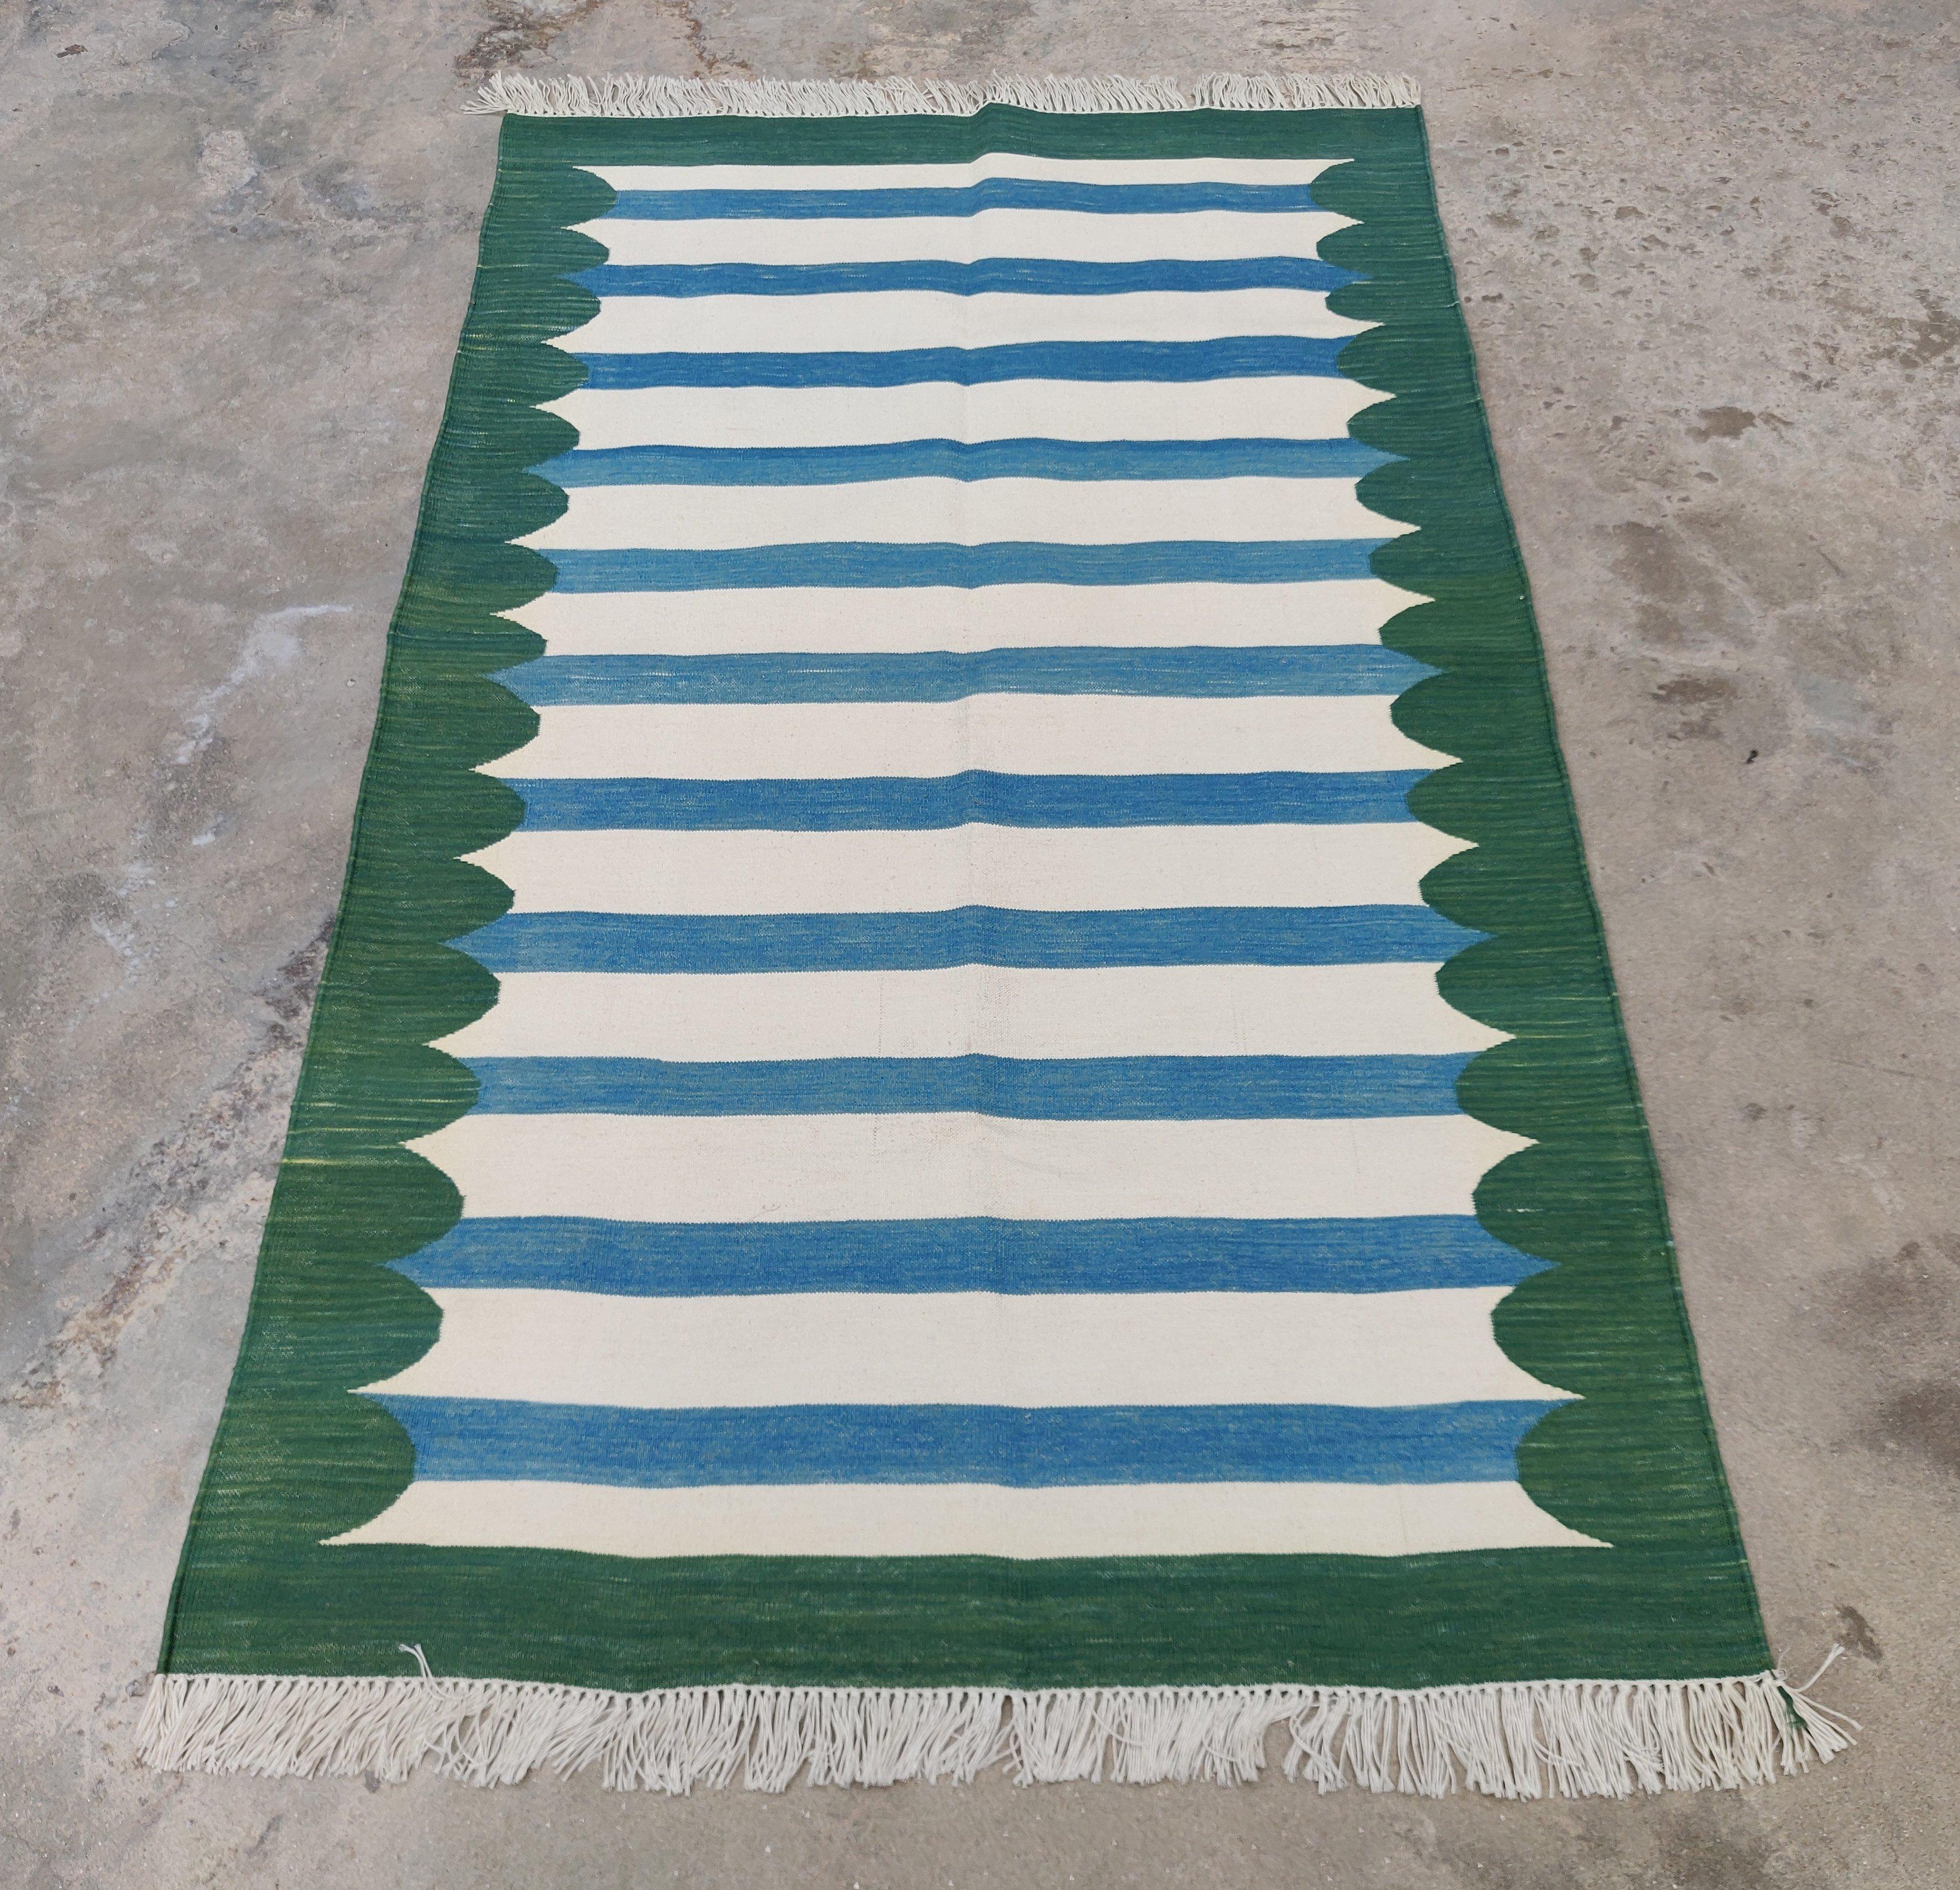 Hand-Woven Handmade Cotton Area Flat Weave Rug, 3x5 Blue And Green Scalloped Indian Dhurrie For Sale